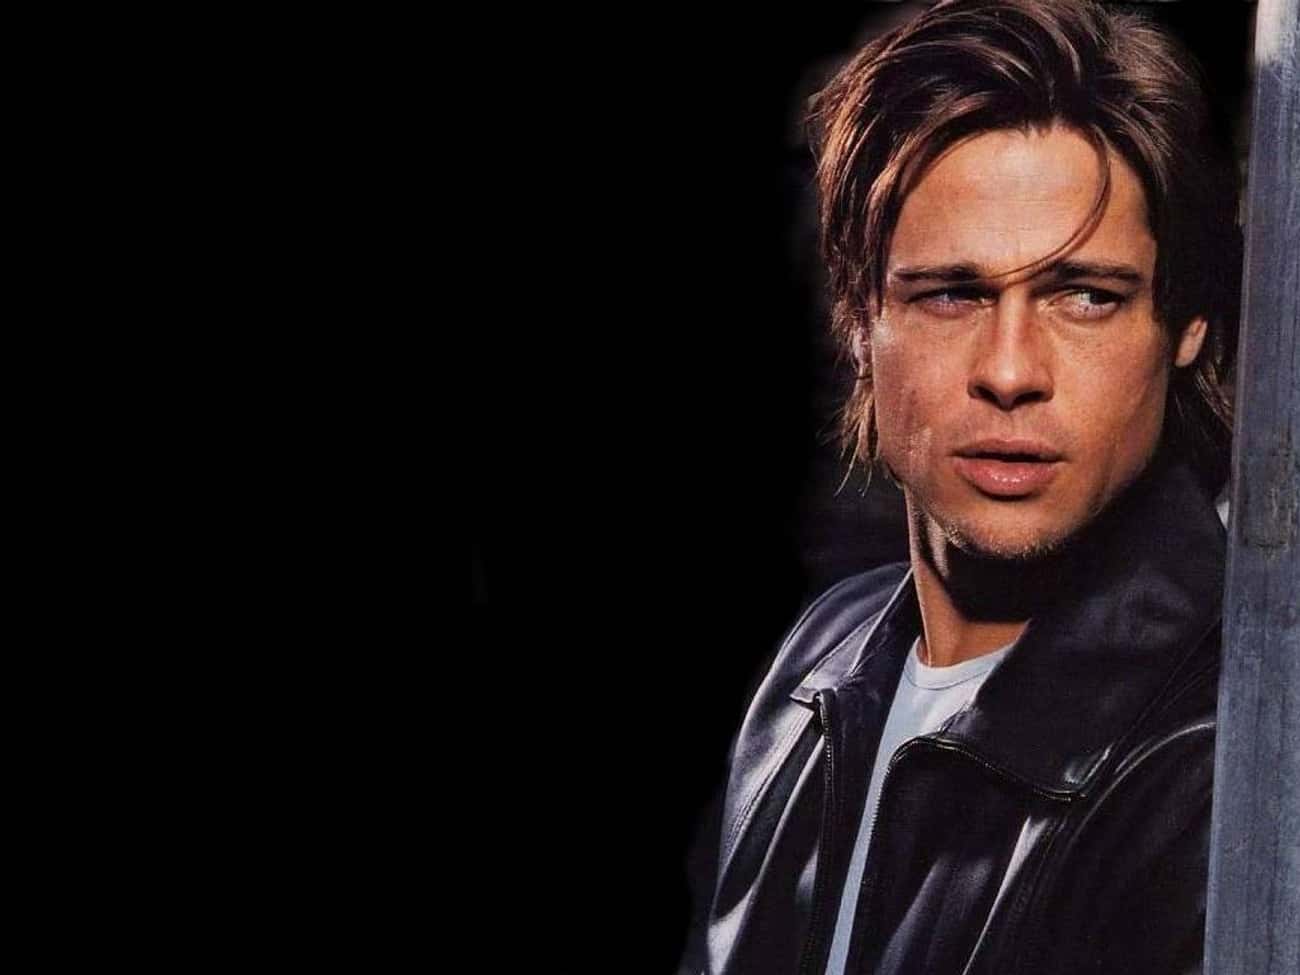 Brad Pitt Is Ready for Sneaky Action